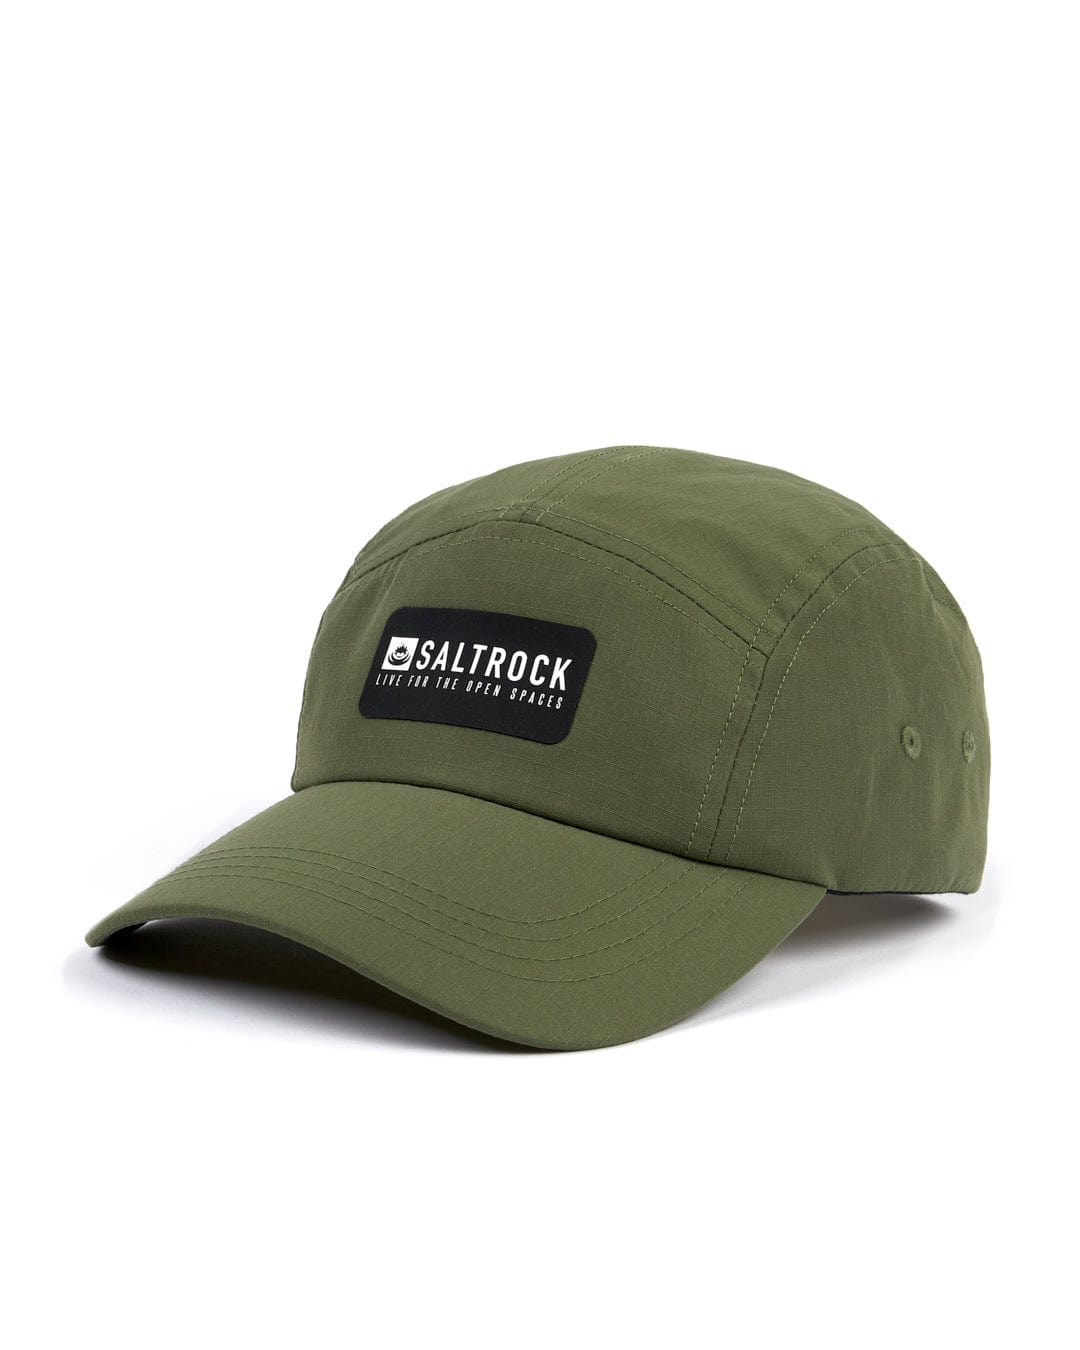 The Gaitor 5 Panel UPF Cap - Green by Saltrock offers UPF protection.